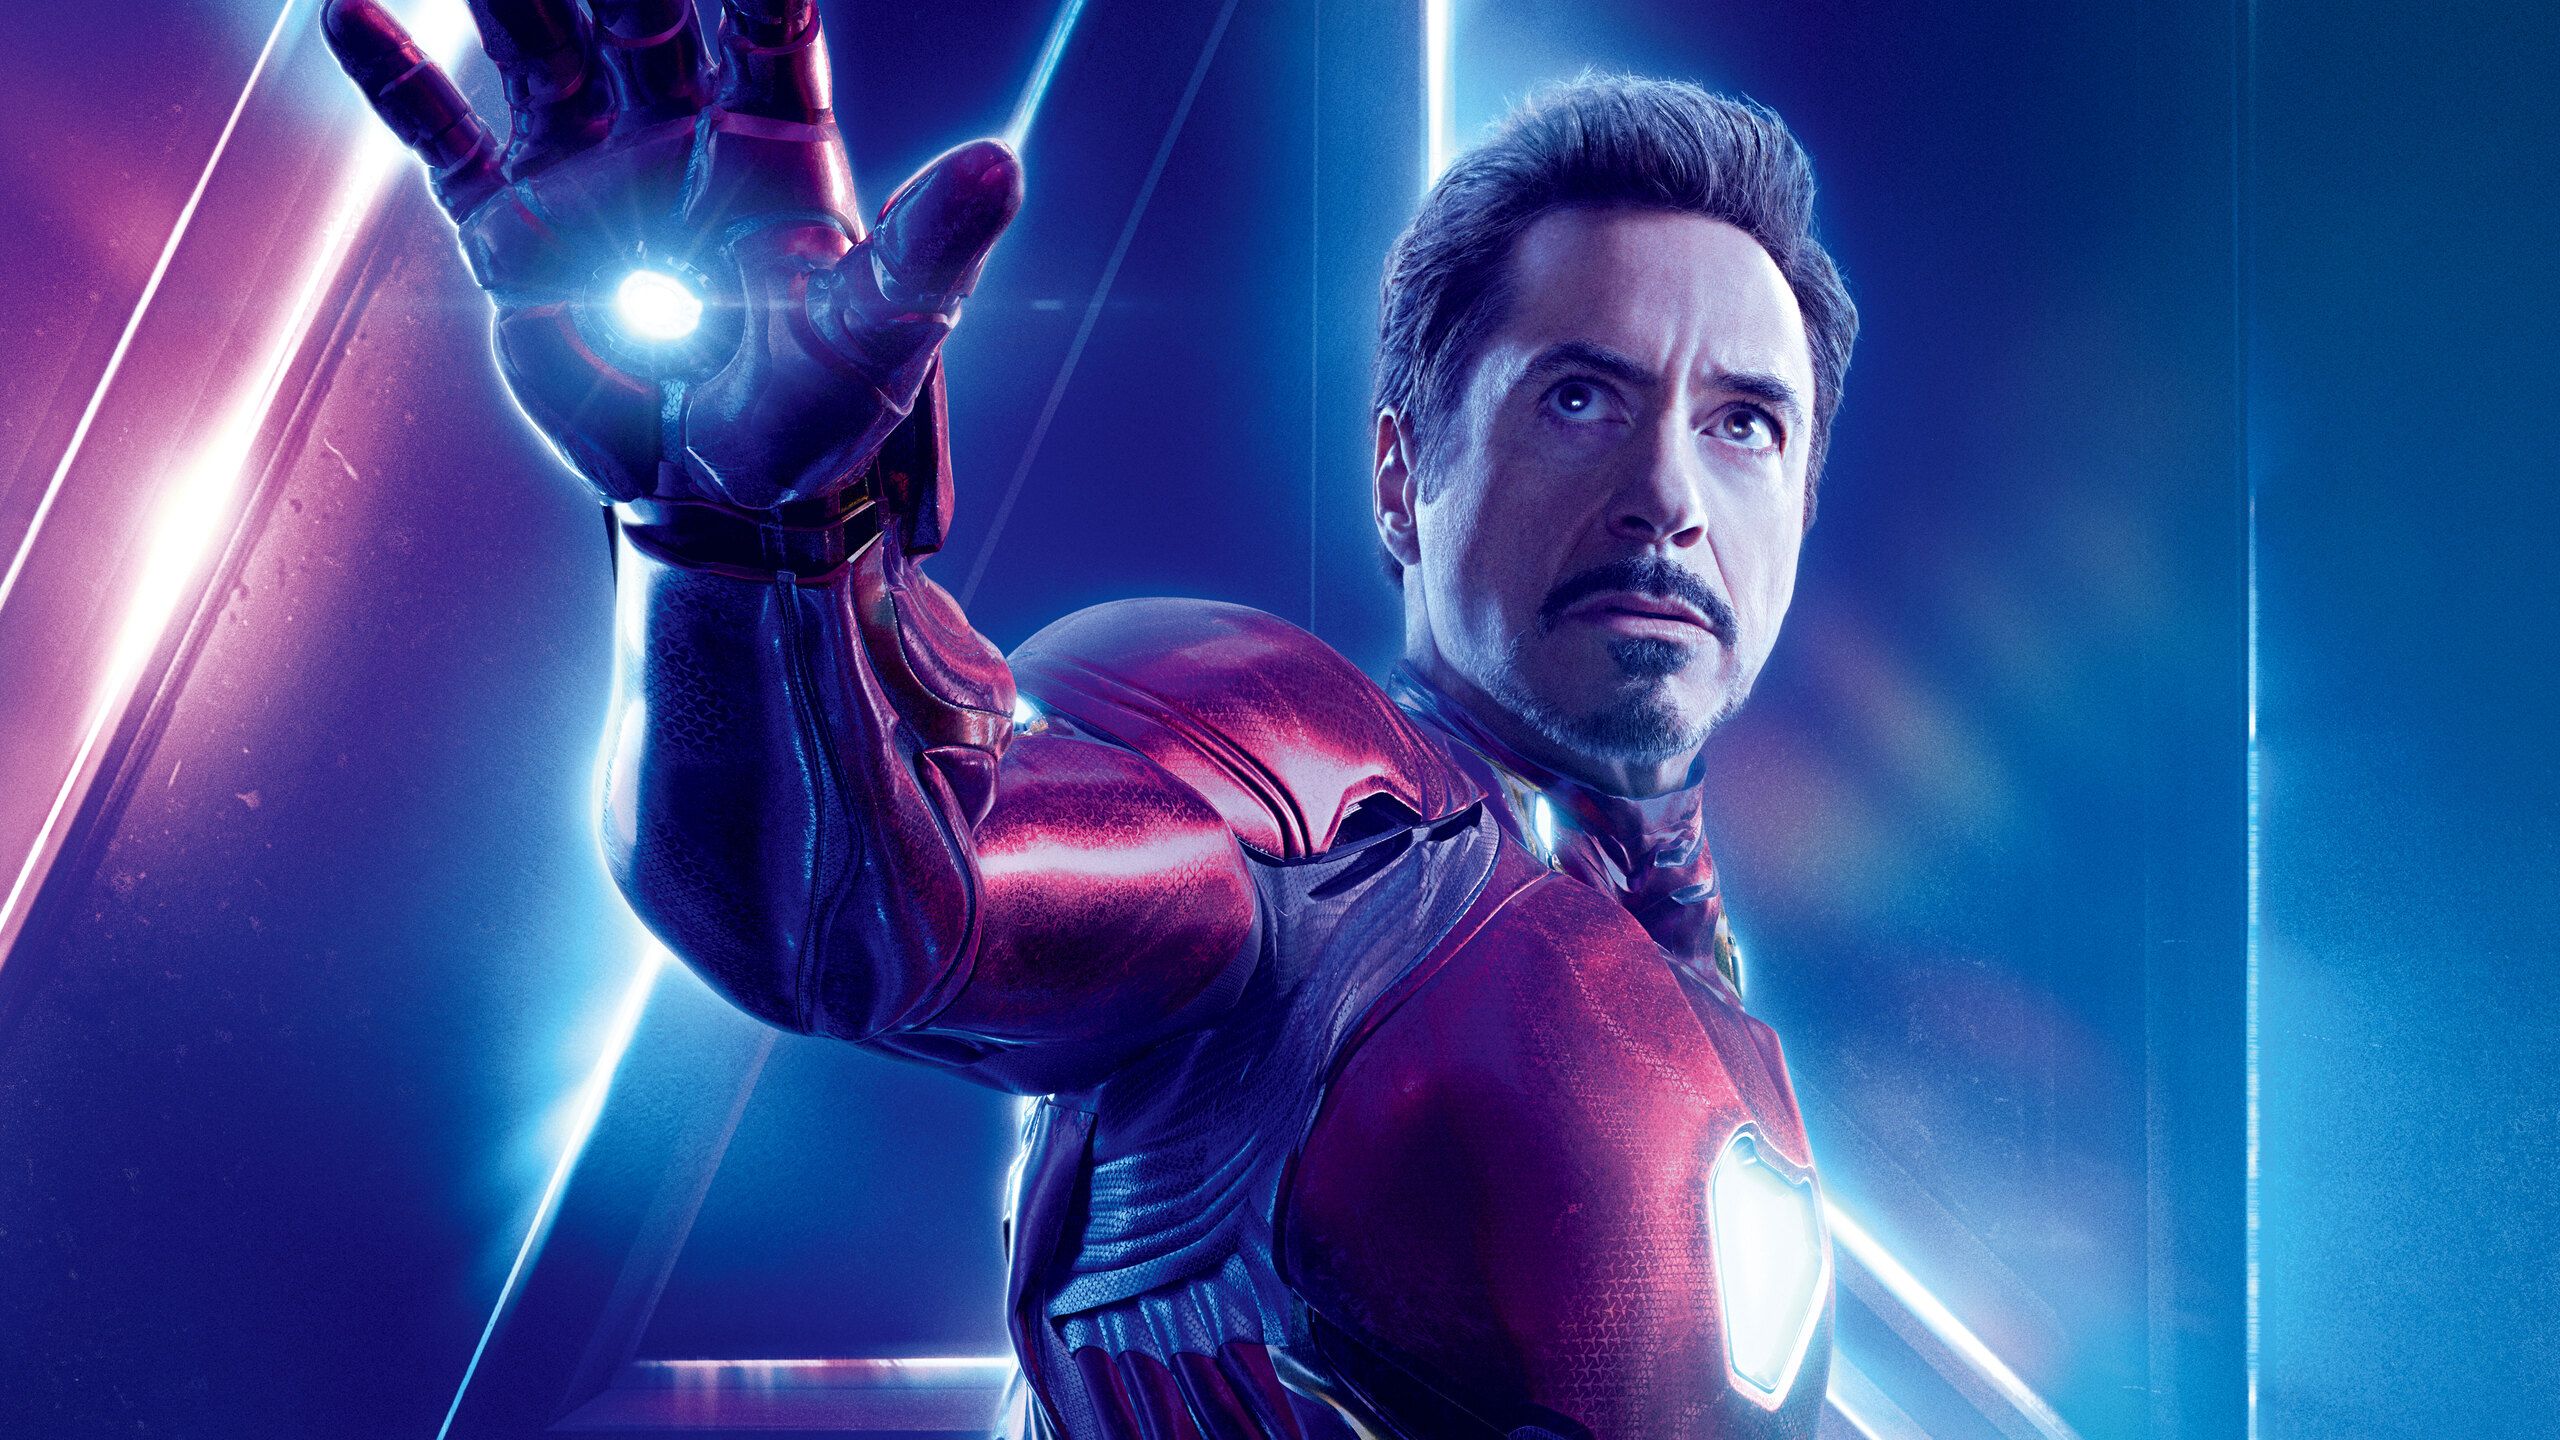 Iron Man In Avengers Infinity War 8k Poster 1440P Resolution HD 4k Wallpaper, Image, Background, Photo and Picture